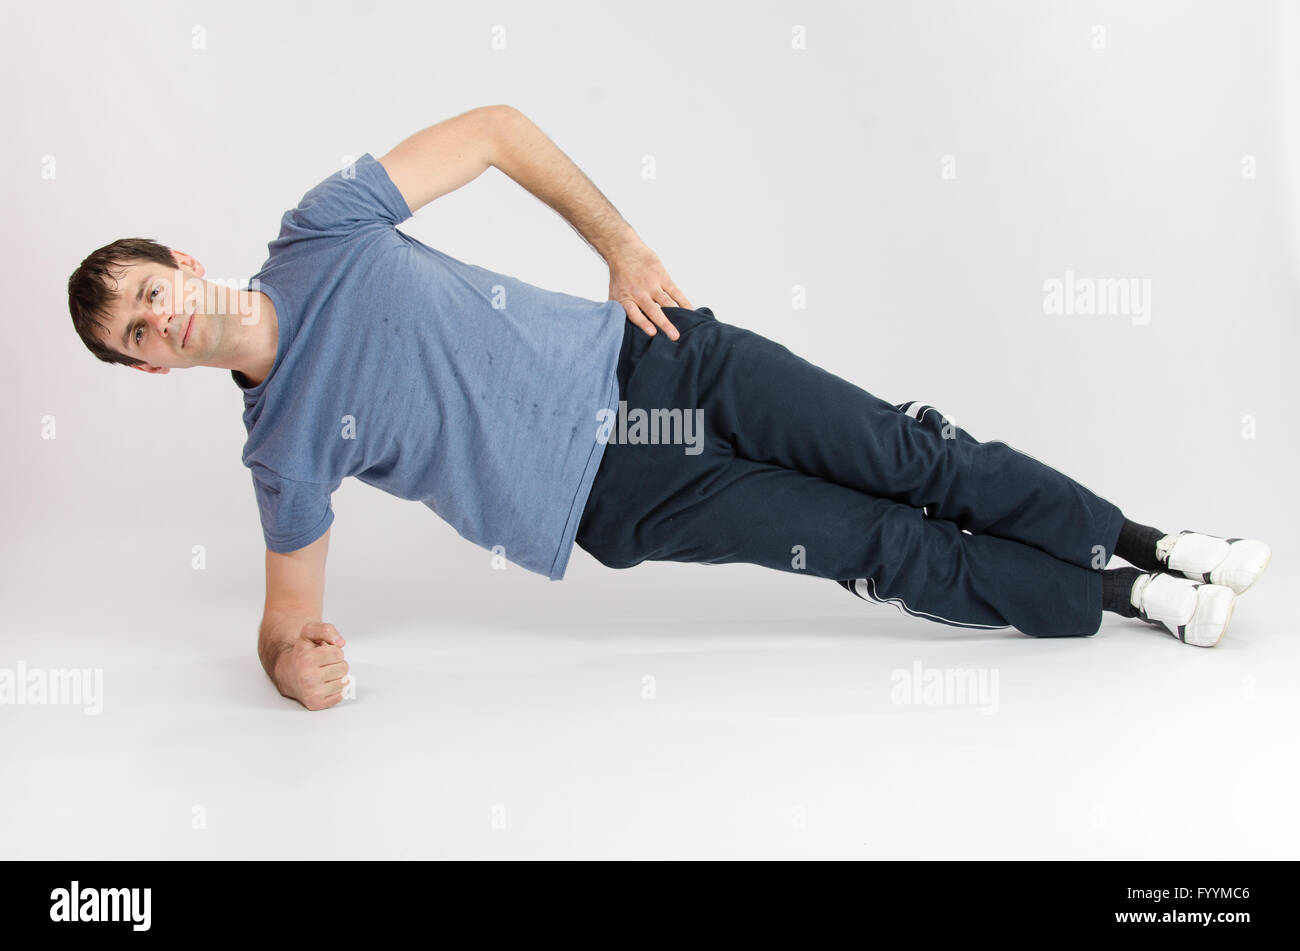 Athlete holding body leaning on the right arm Stock Photo